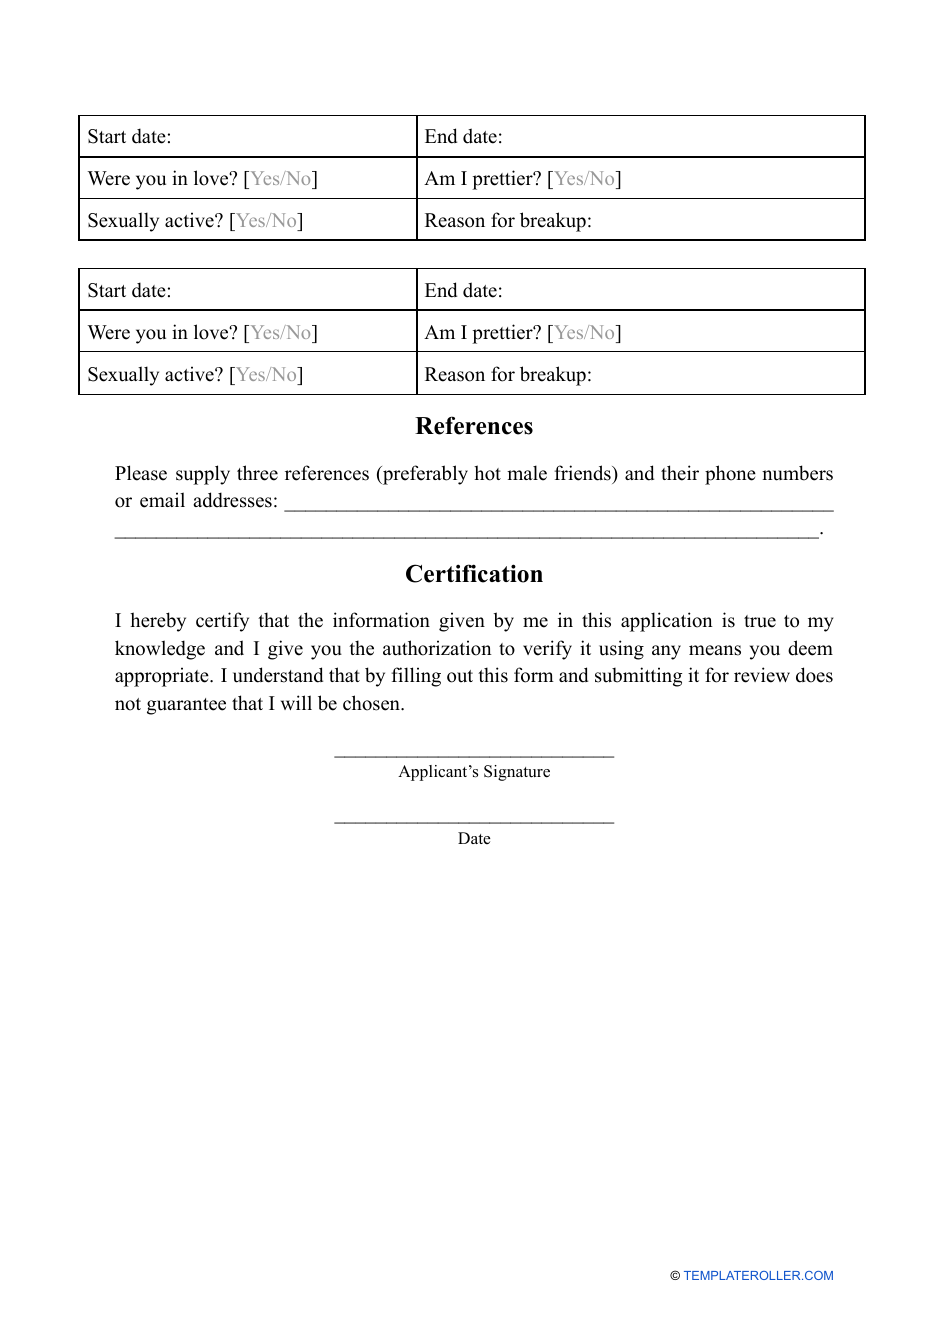 Boyfriend Application Form Fill Out Sign Online And Download Pdf Templateroller 5351